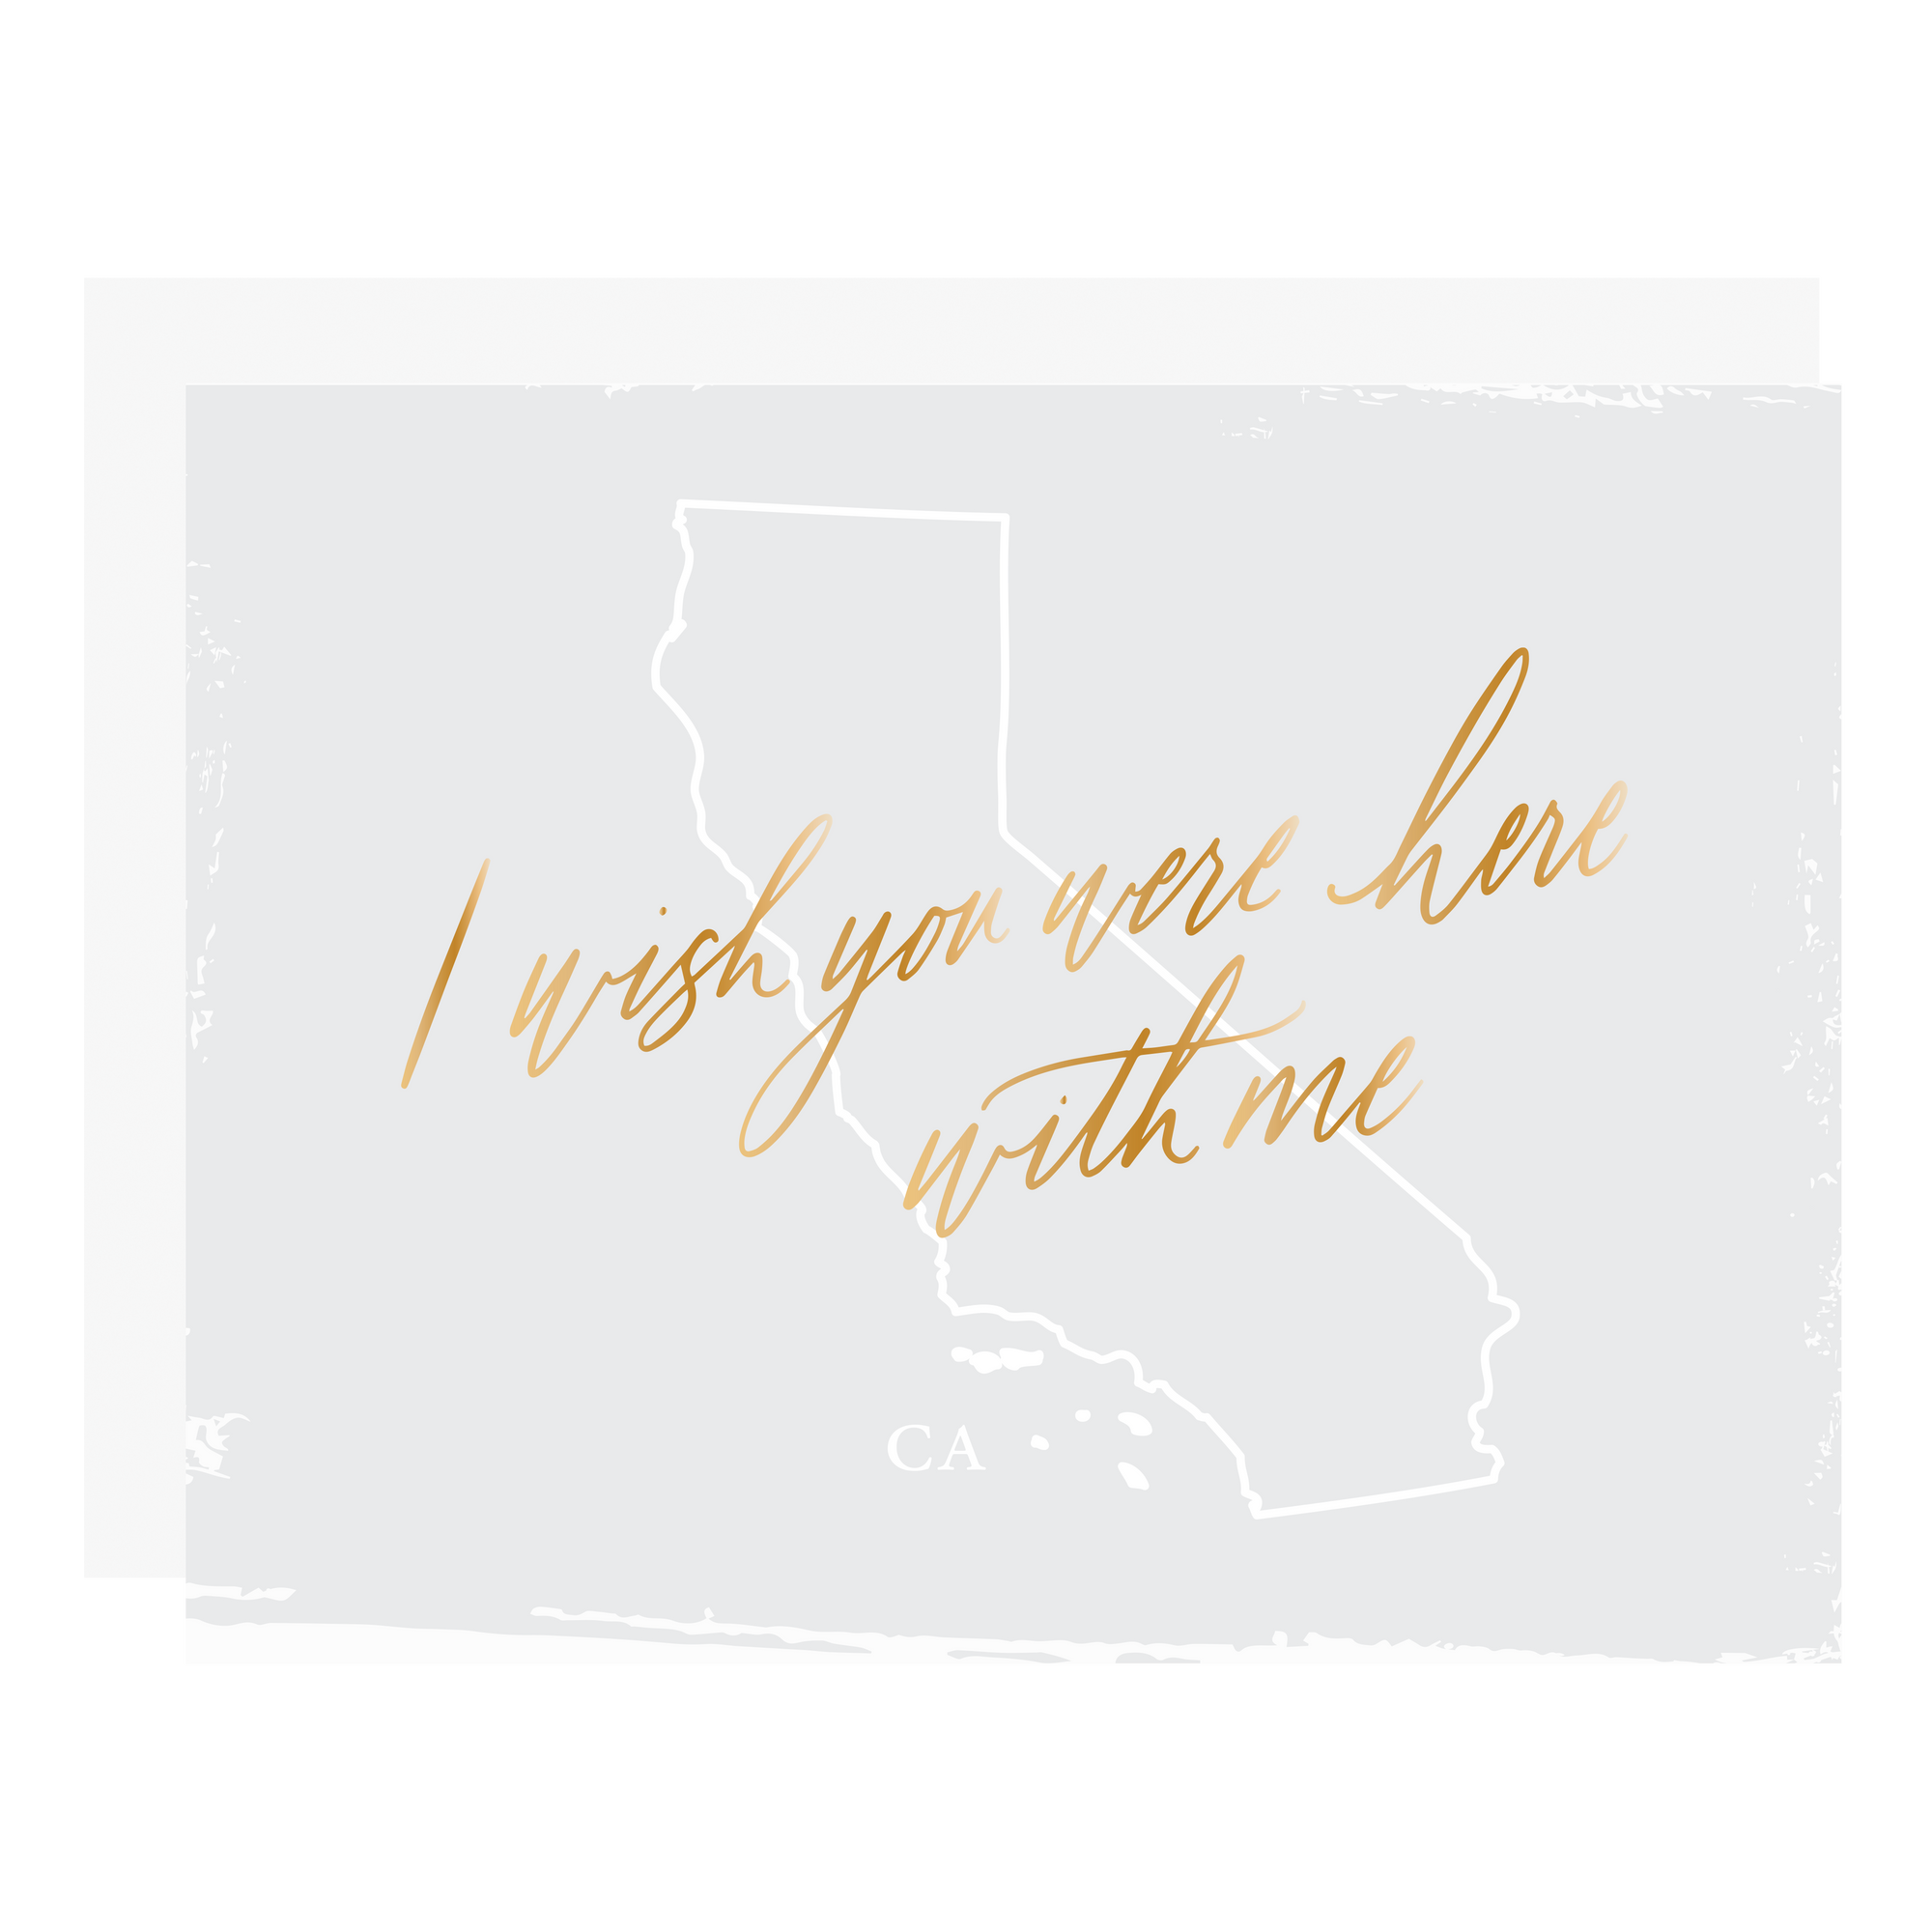 "Wish You Were Here With Me - California", letterpress printed by hand with gold foil. 